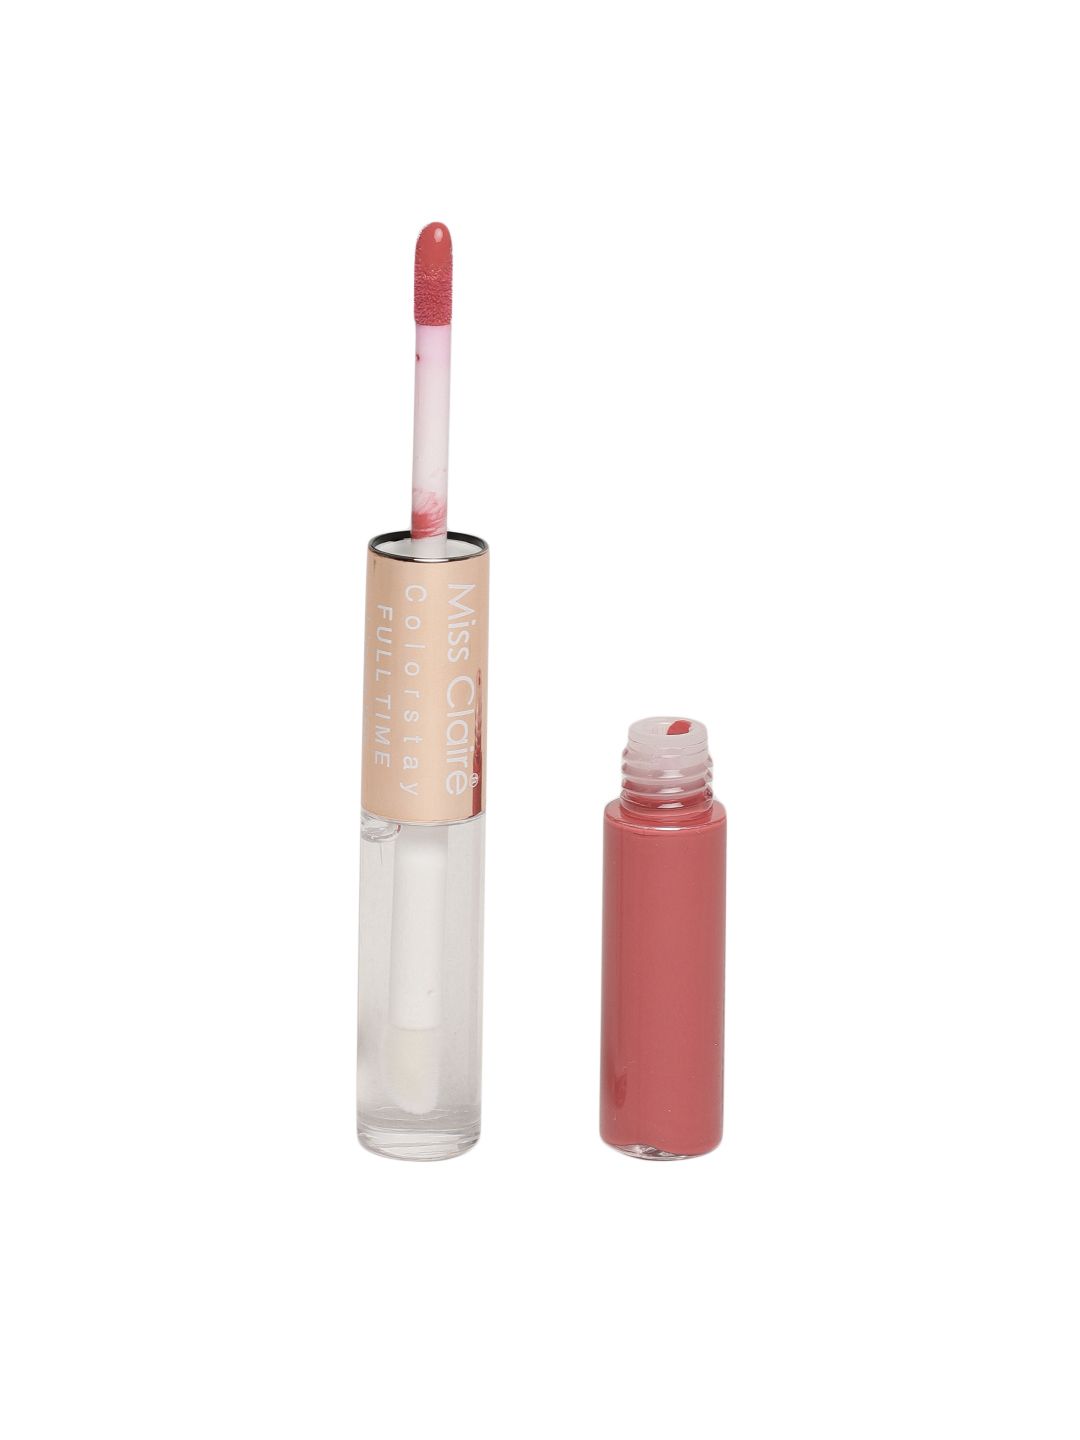 Miss Claire 11 Colorstay Full Time Lipcolor 10ml Price in India